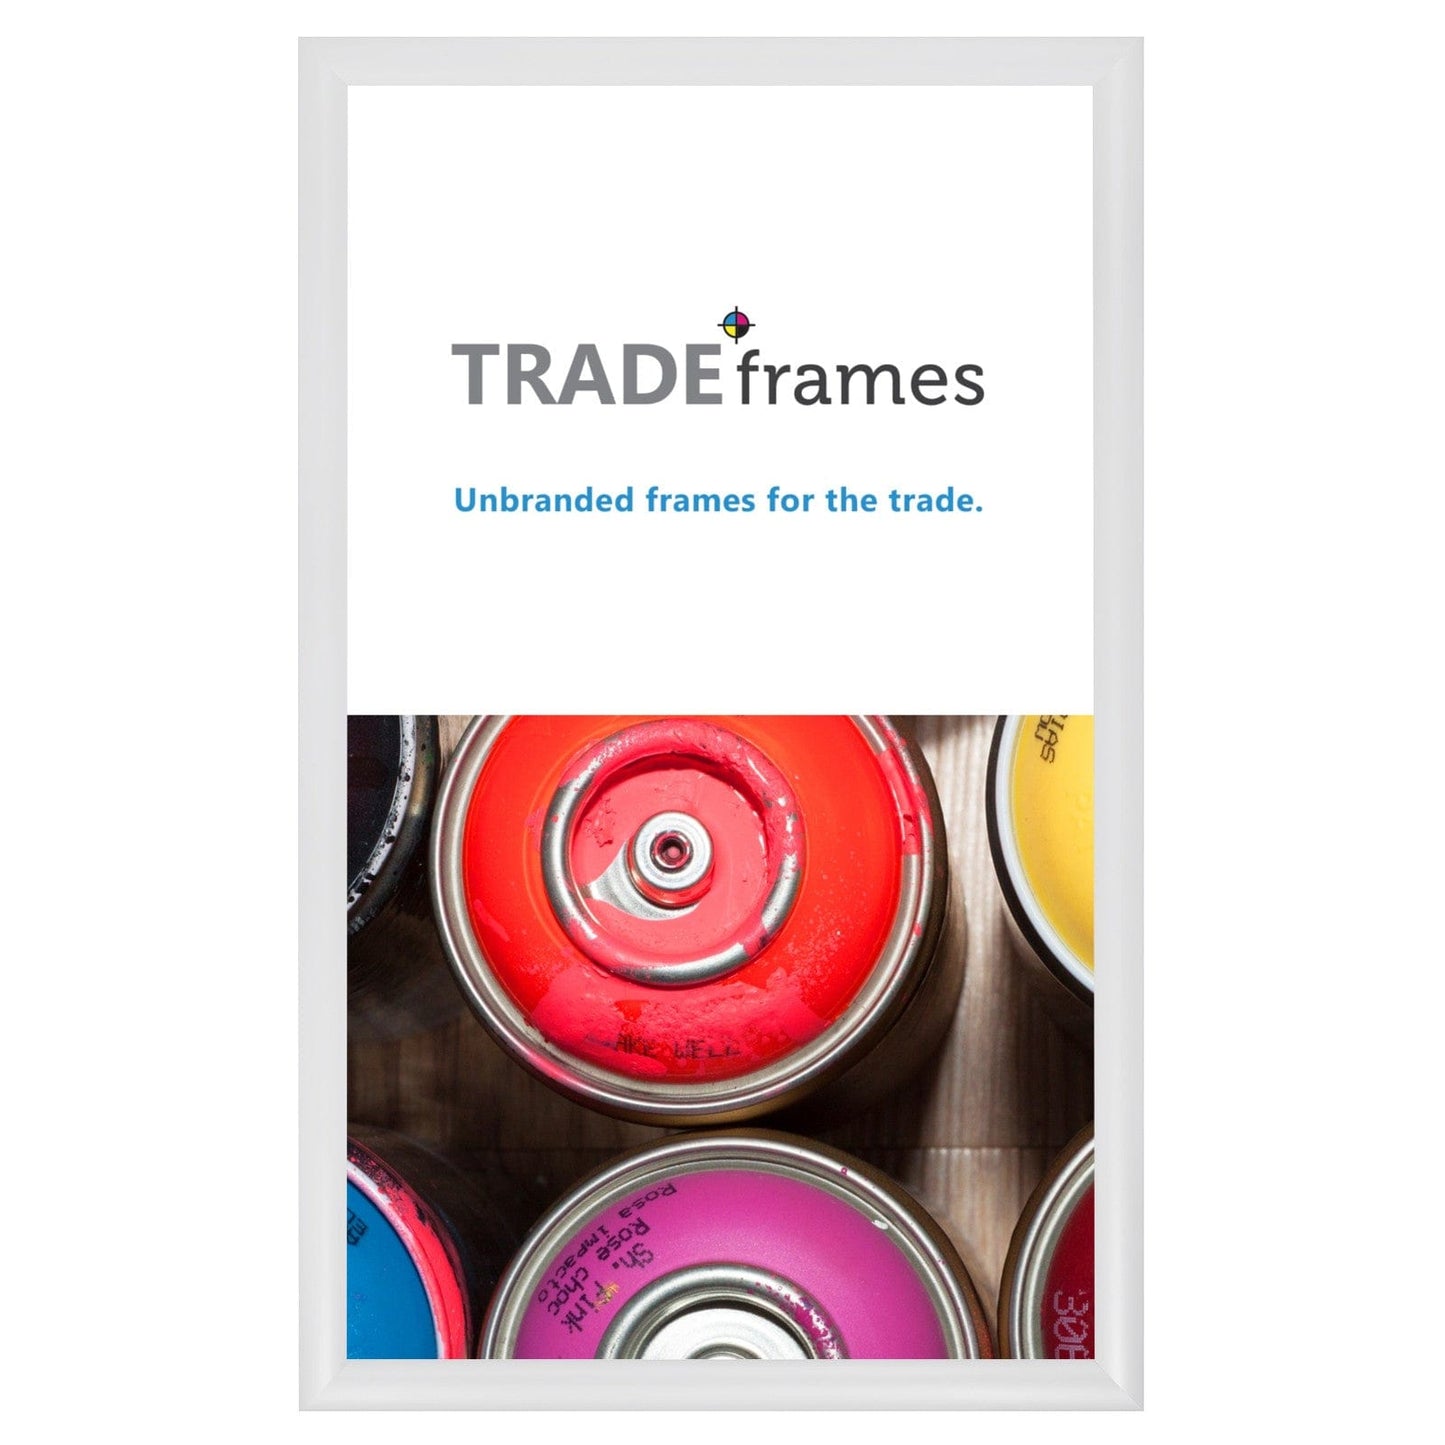 12x20 TRADEframe White Snap Frame 12x20 - 1.2 inch profile - Snap Frames Direct